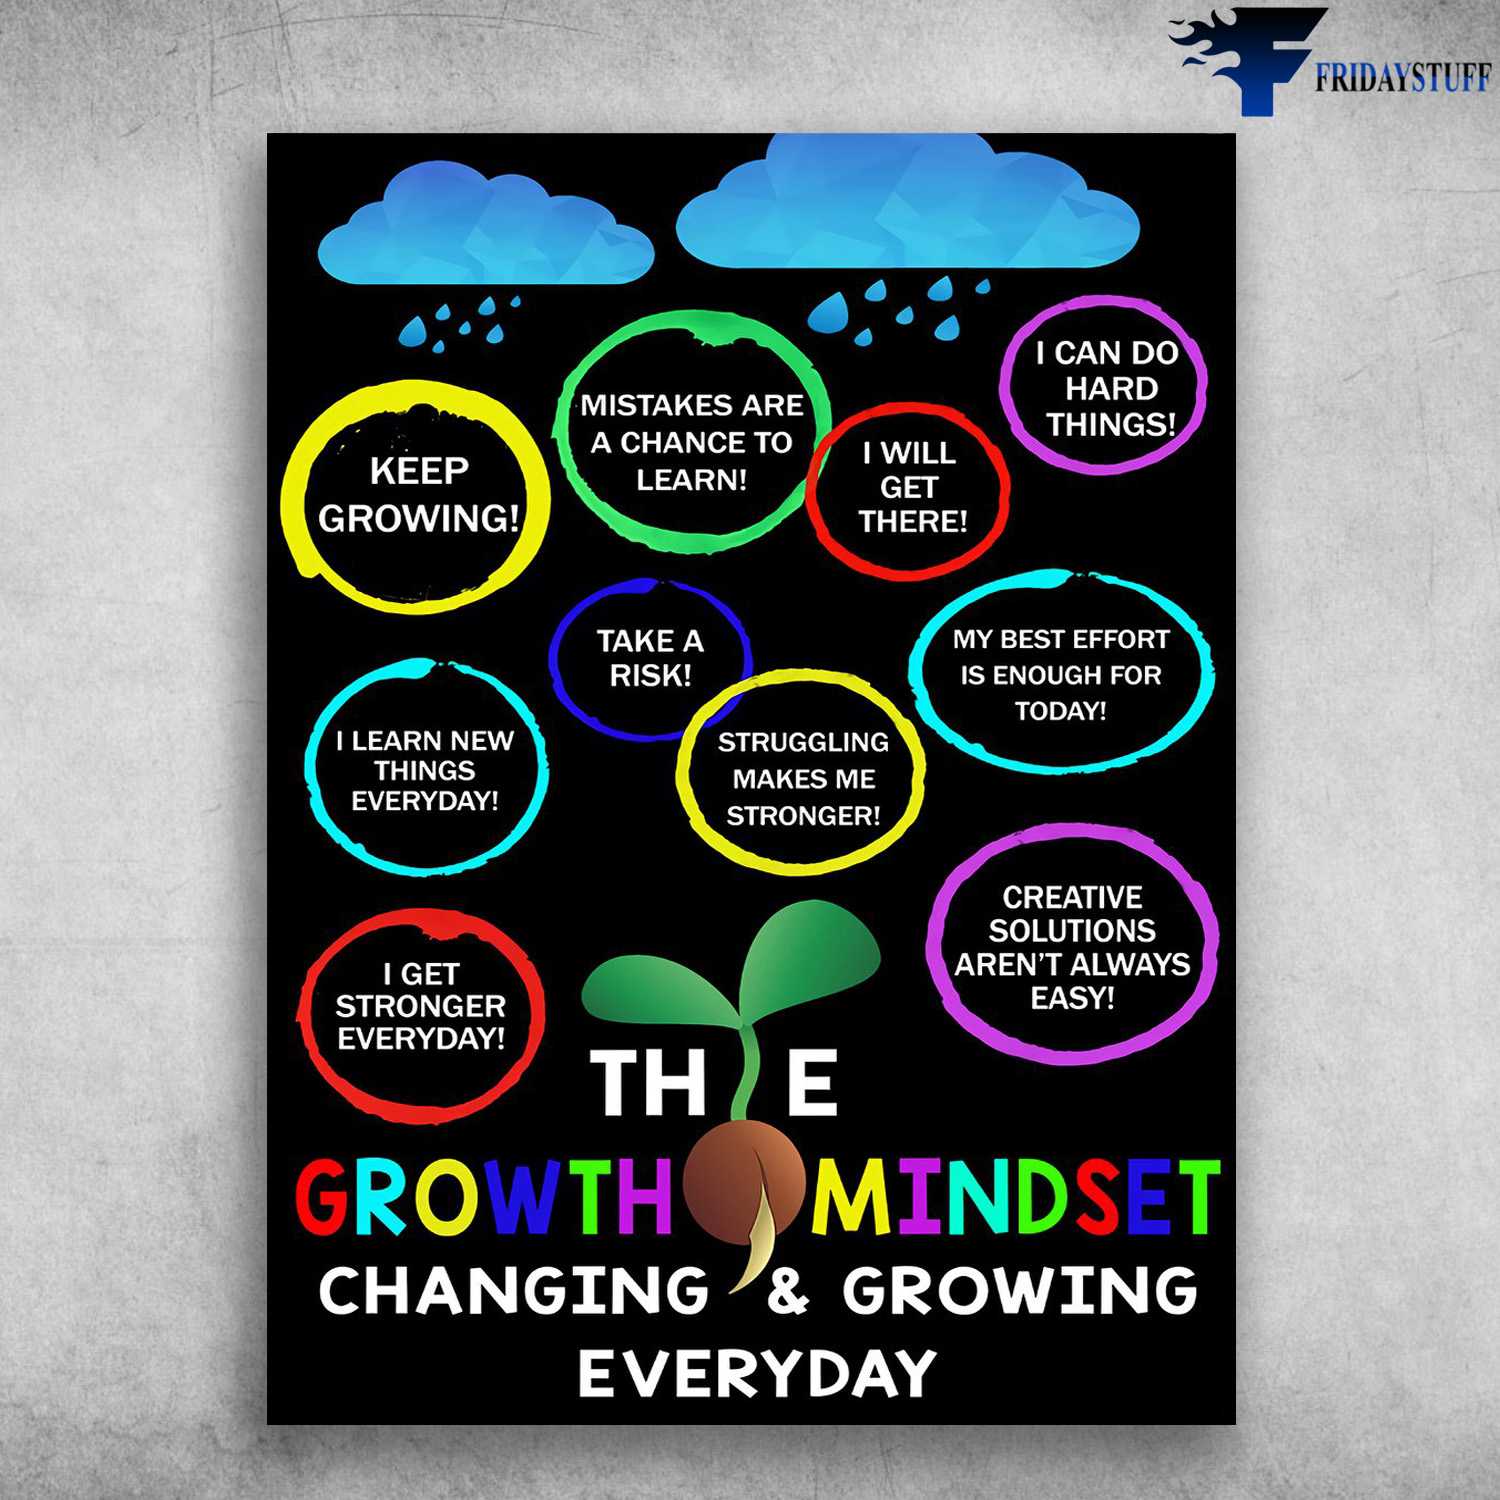 Growth Mindset - Keep Growing, Mistakes Are A Chance To Learn, I Will Get There, I Can Do Hard Things, Take A Risk, The Growth Mindset, Changing And Growing Everyday